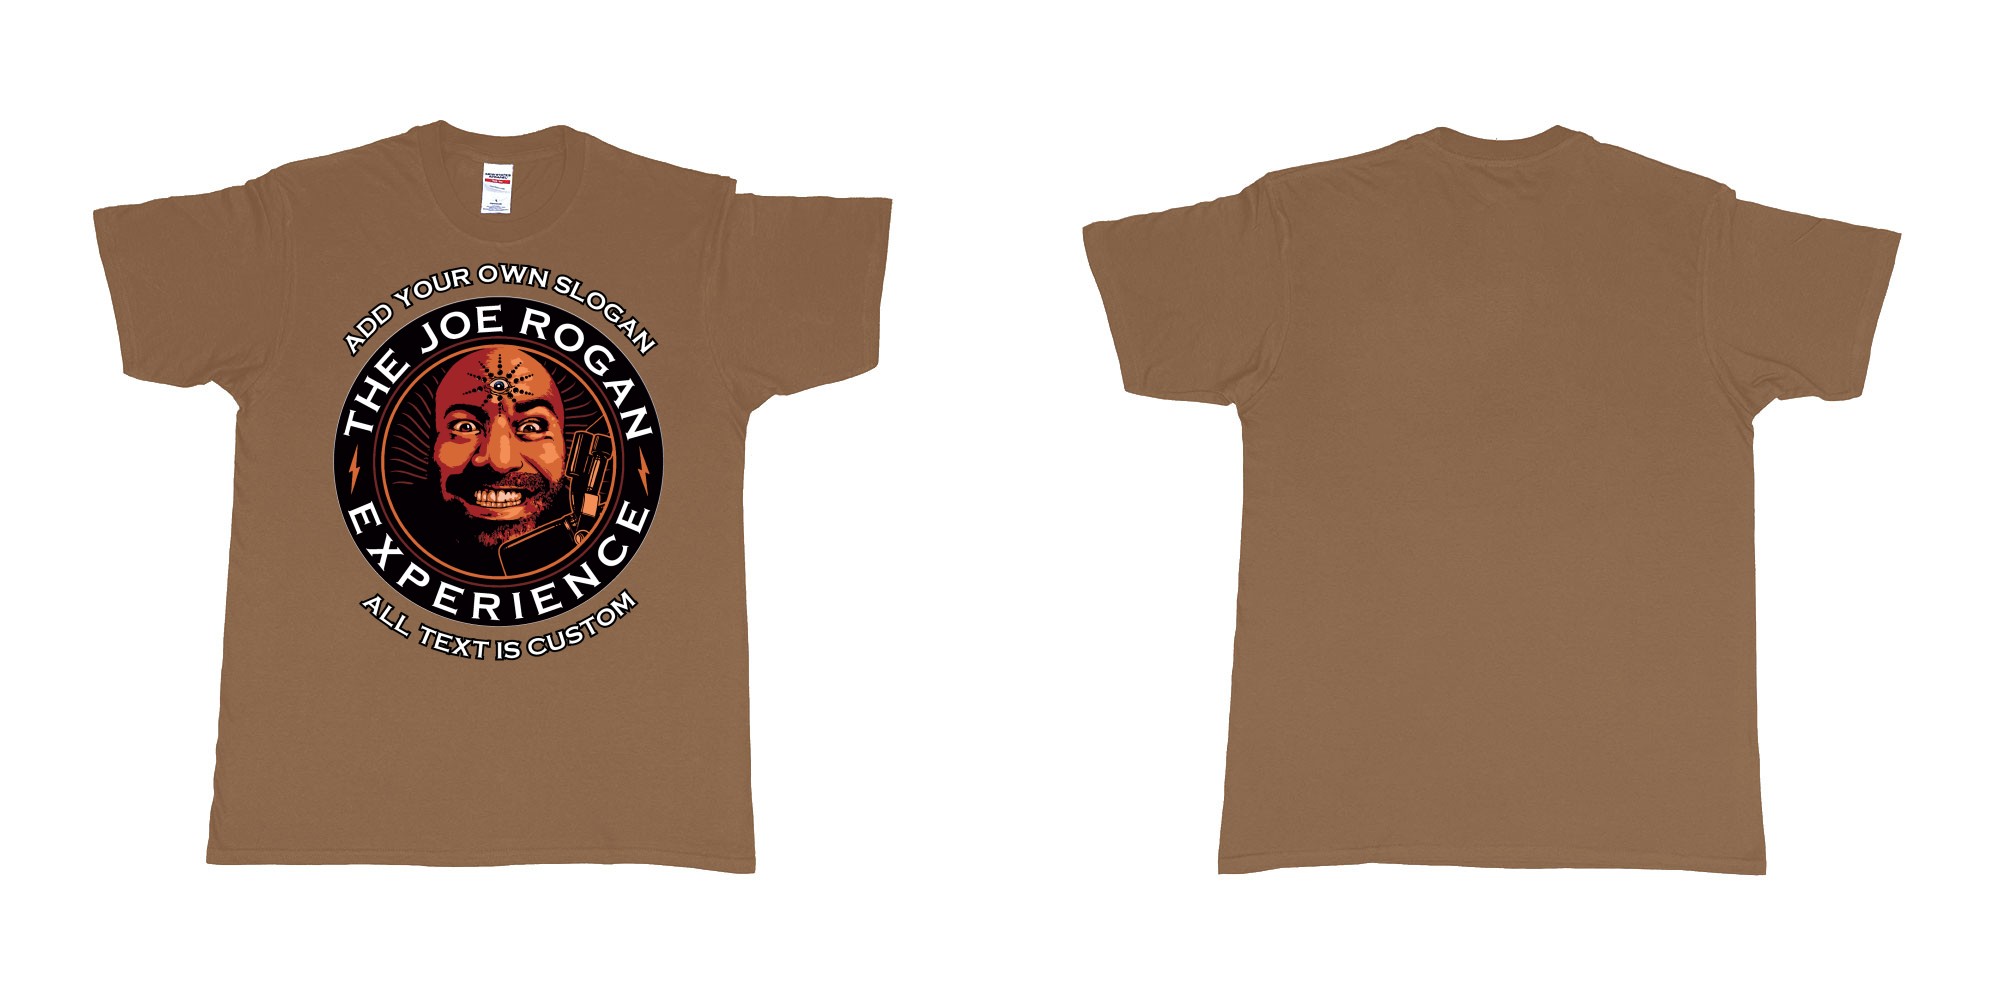 Custom tshirt design the joe rogan experience custom tshirt in fabric color chestnut choice your own text made in Bali by The Pirate Way